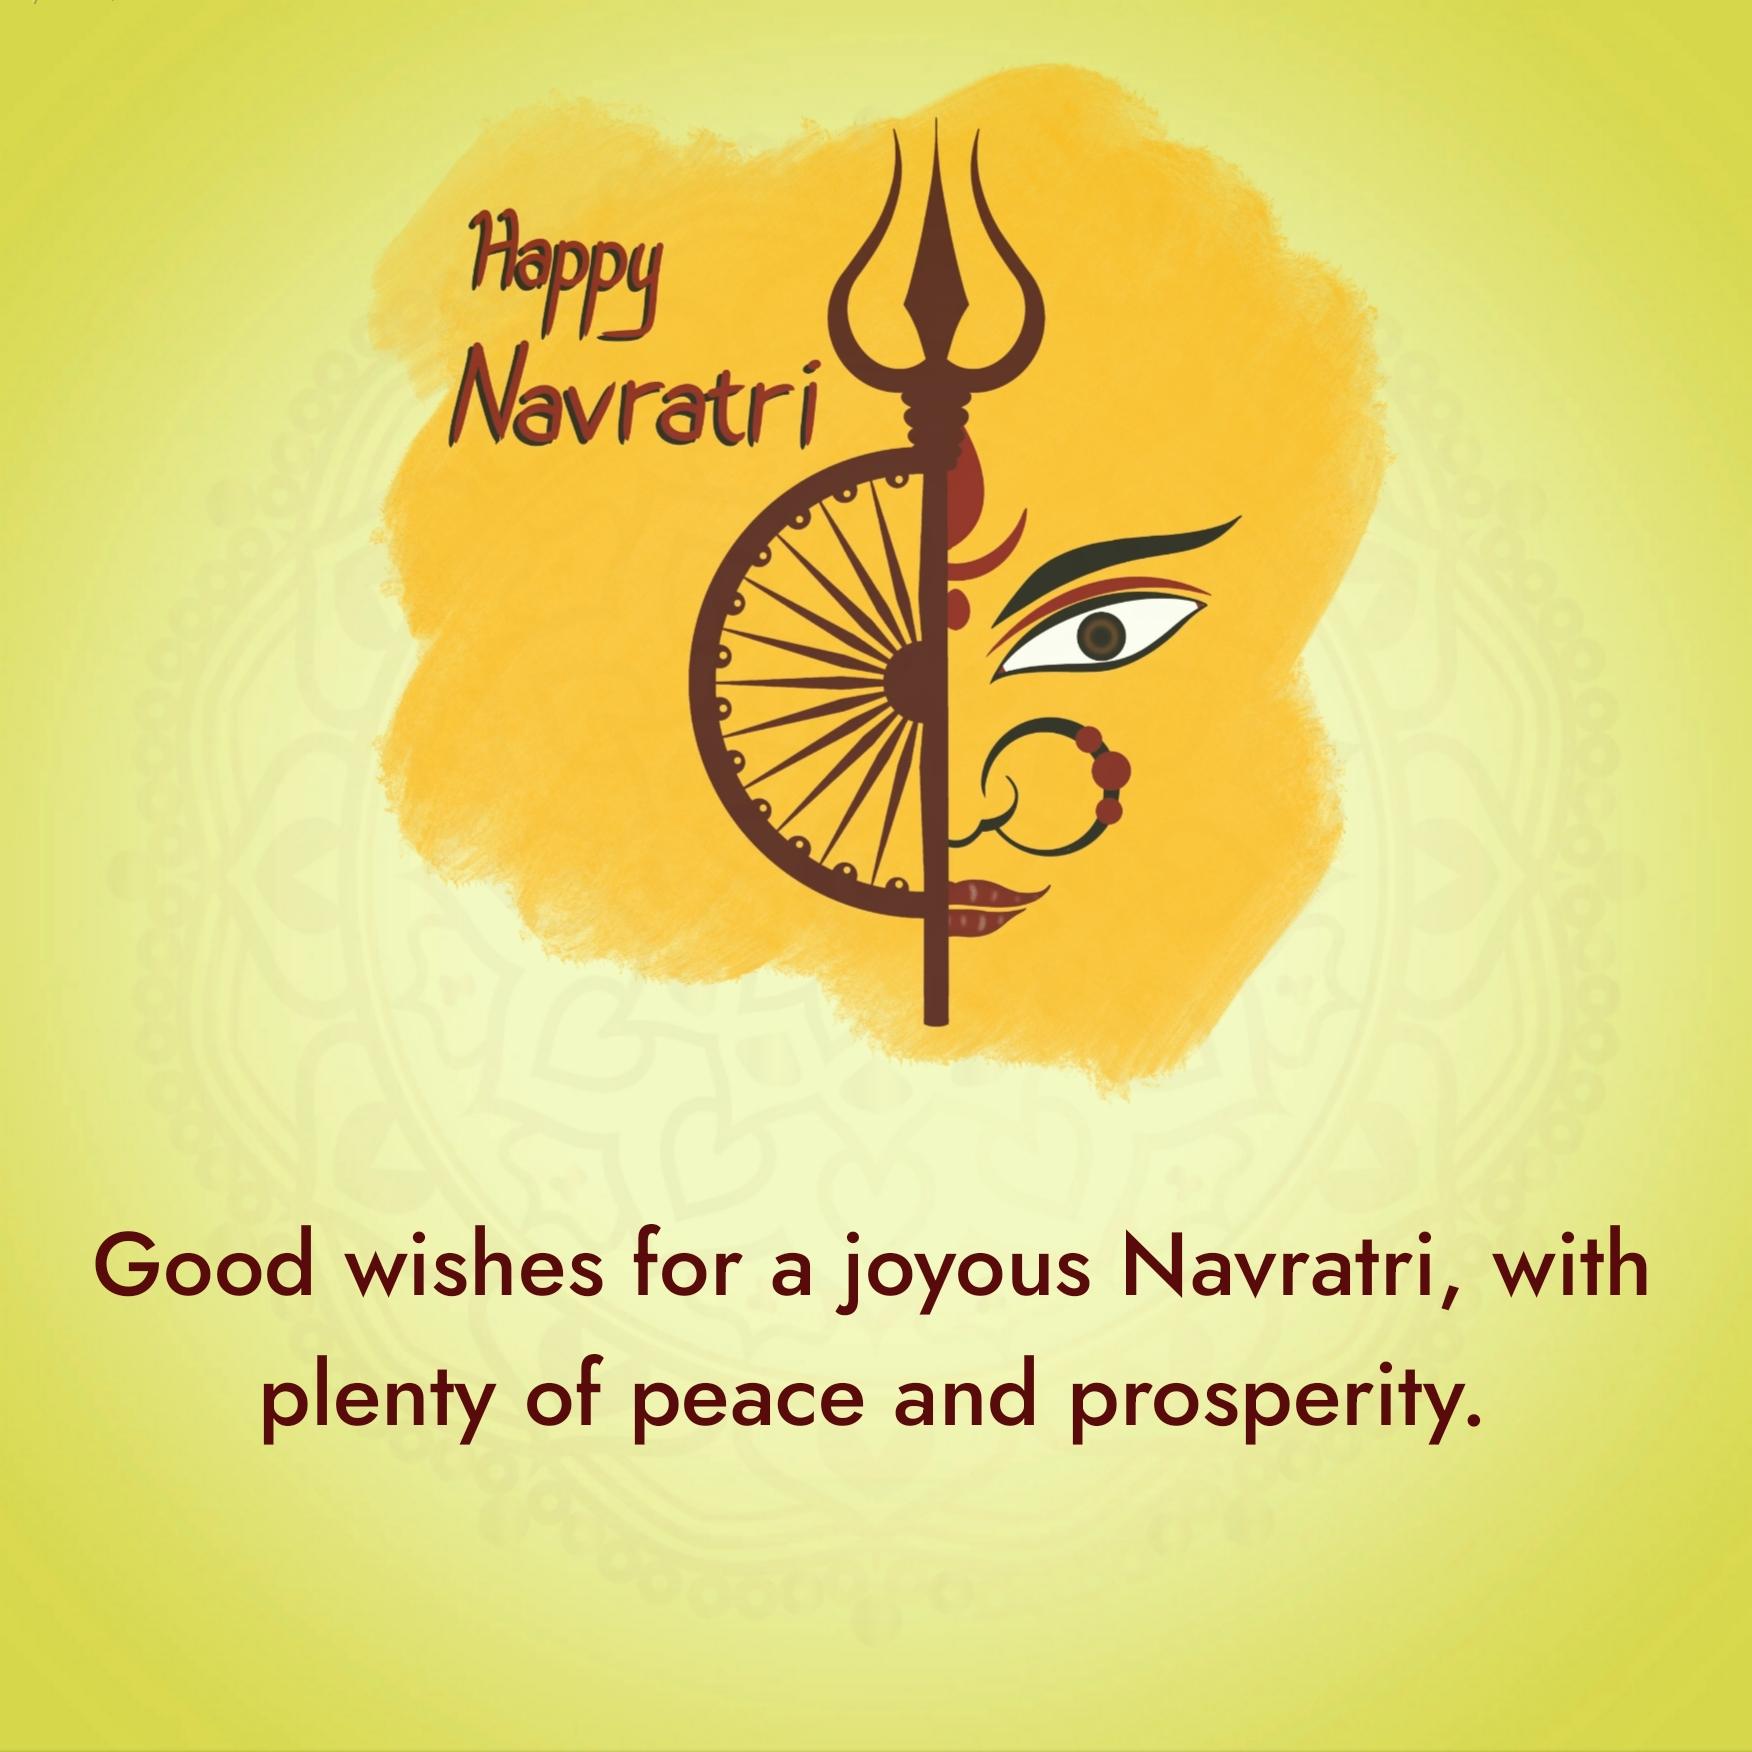 Good wishes for a joyous Navratri with plenty of peace